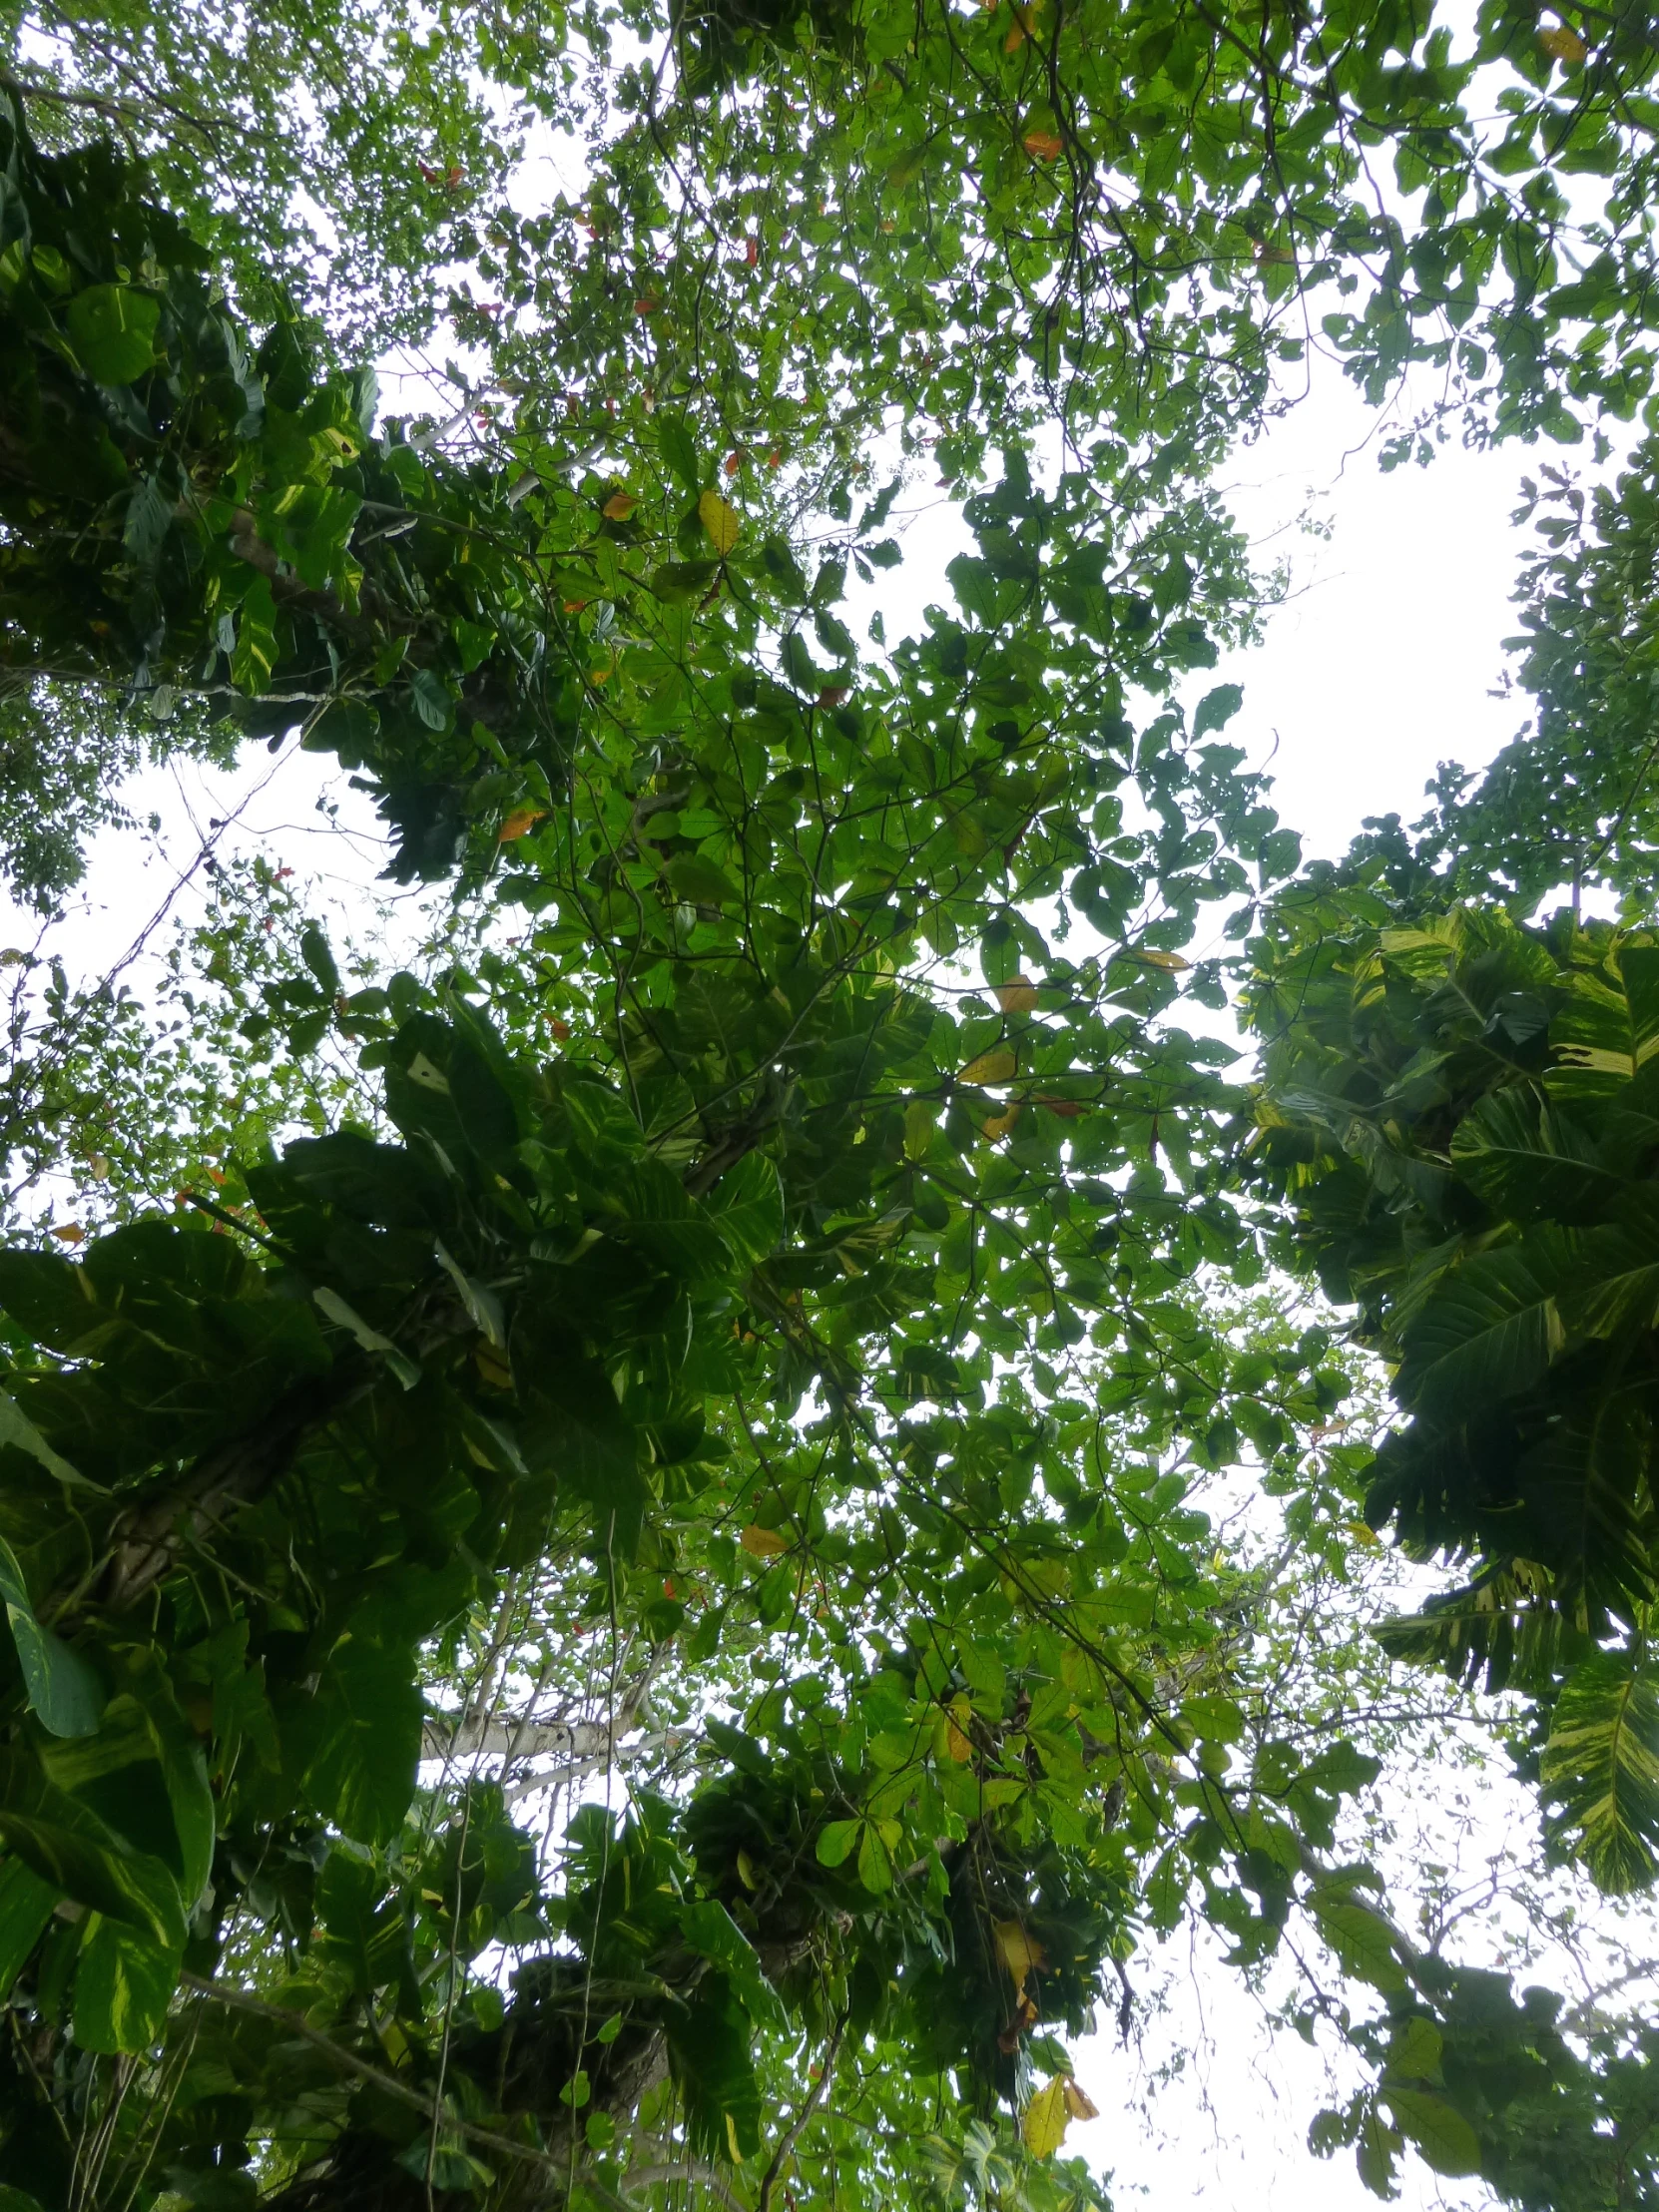 a picture looking up at the canopy of green foliage